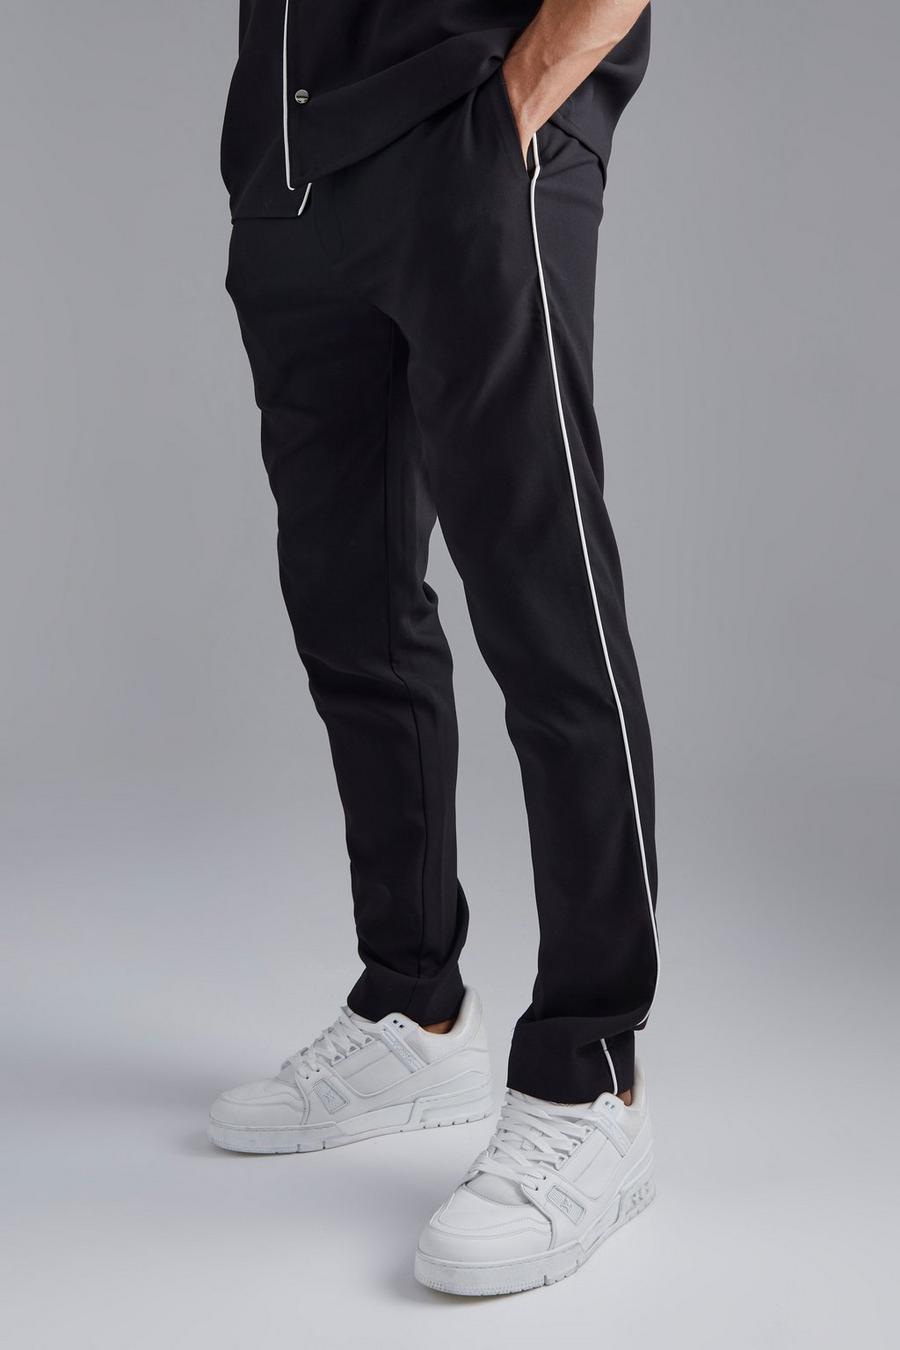 Black Elasticated Skinny Piping Trousers image number 1